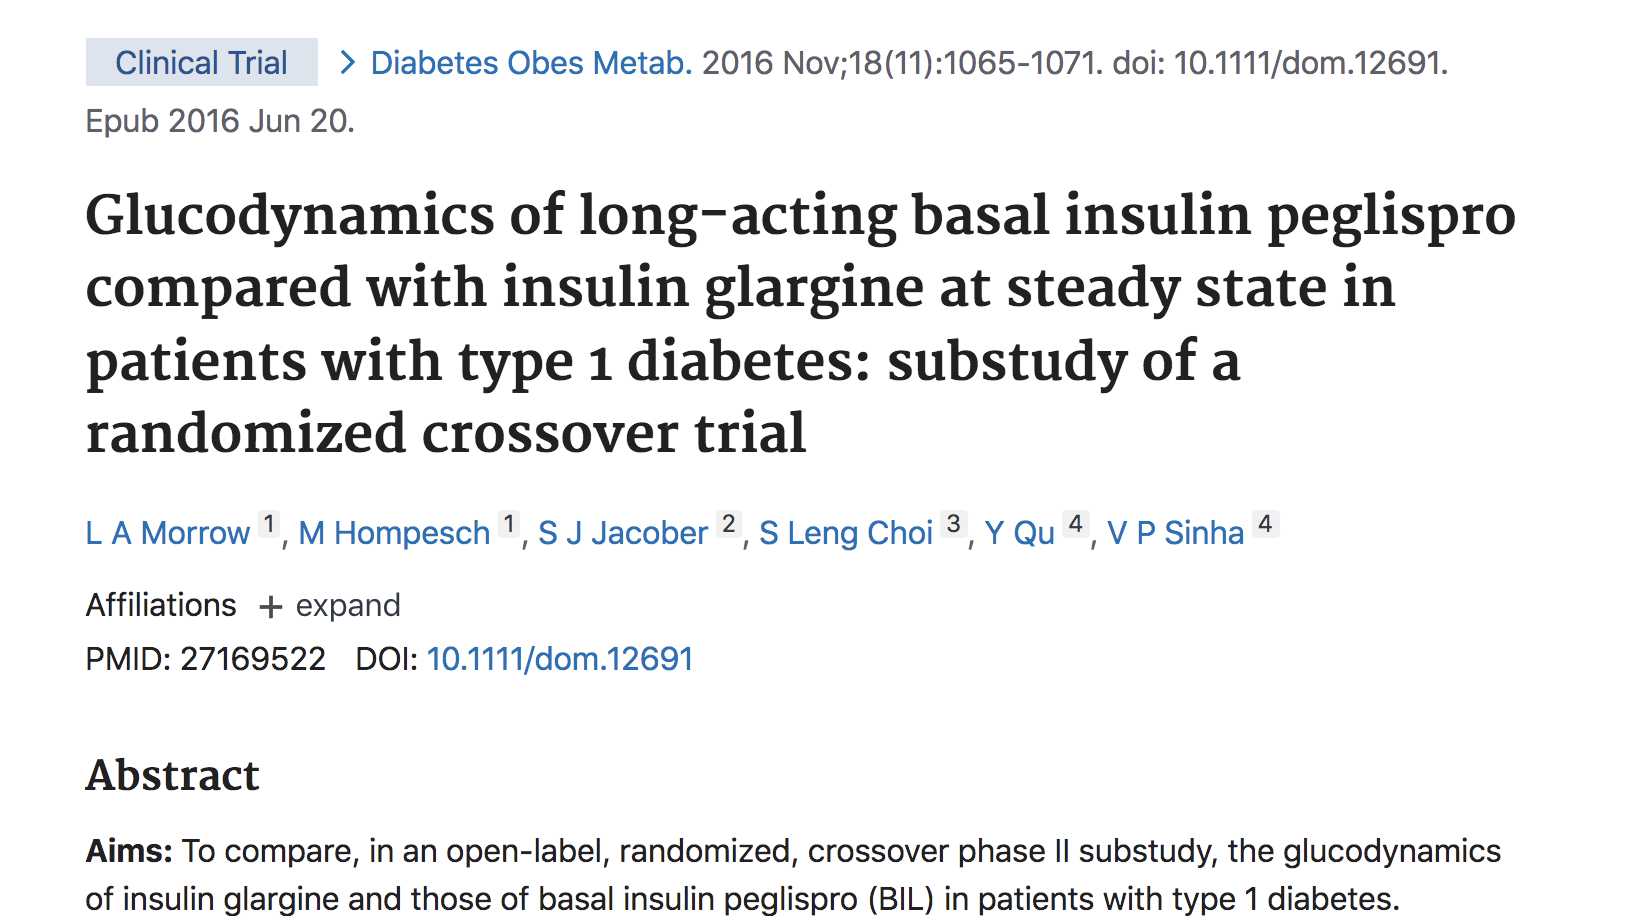 image of Glucodynamics of Long-Acting Basal Insulin Peglispro (BIL) Compared With Insulin Glargine at Steady State in Subjects with Type 1 Diabetes: substudy of a randomized crossover trial.